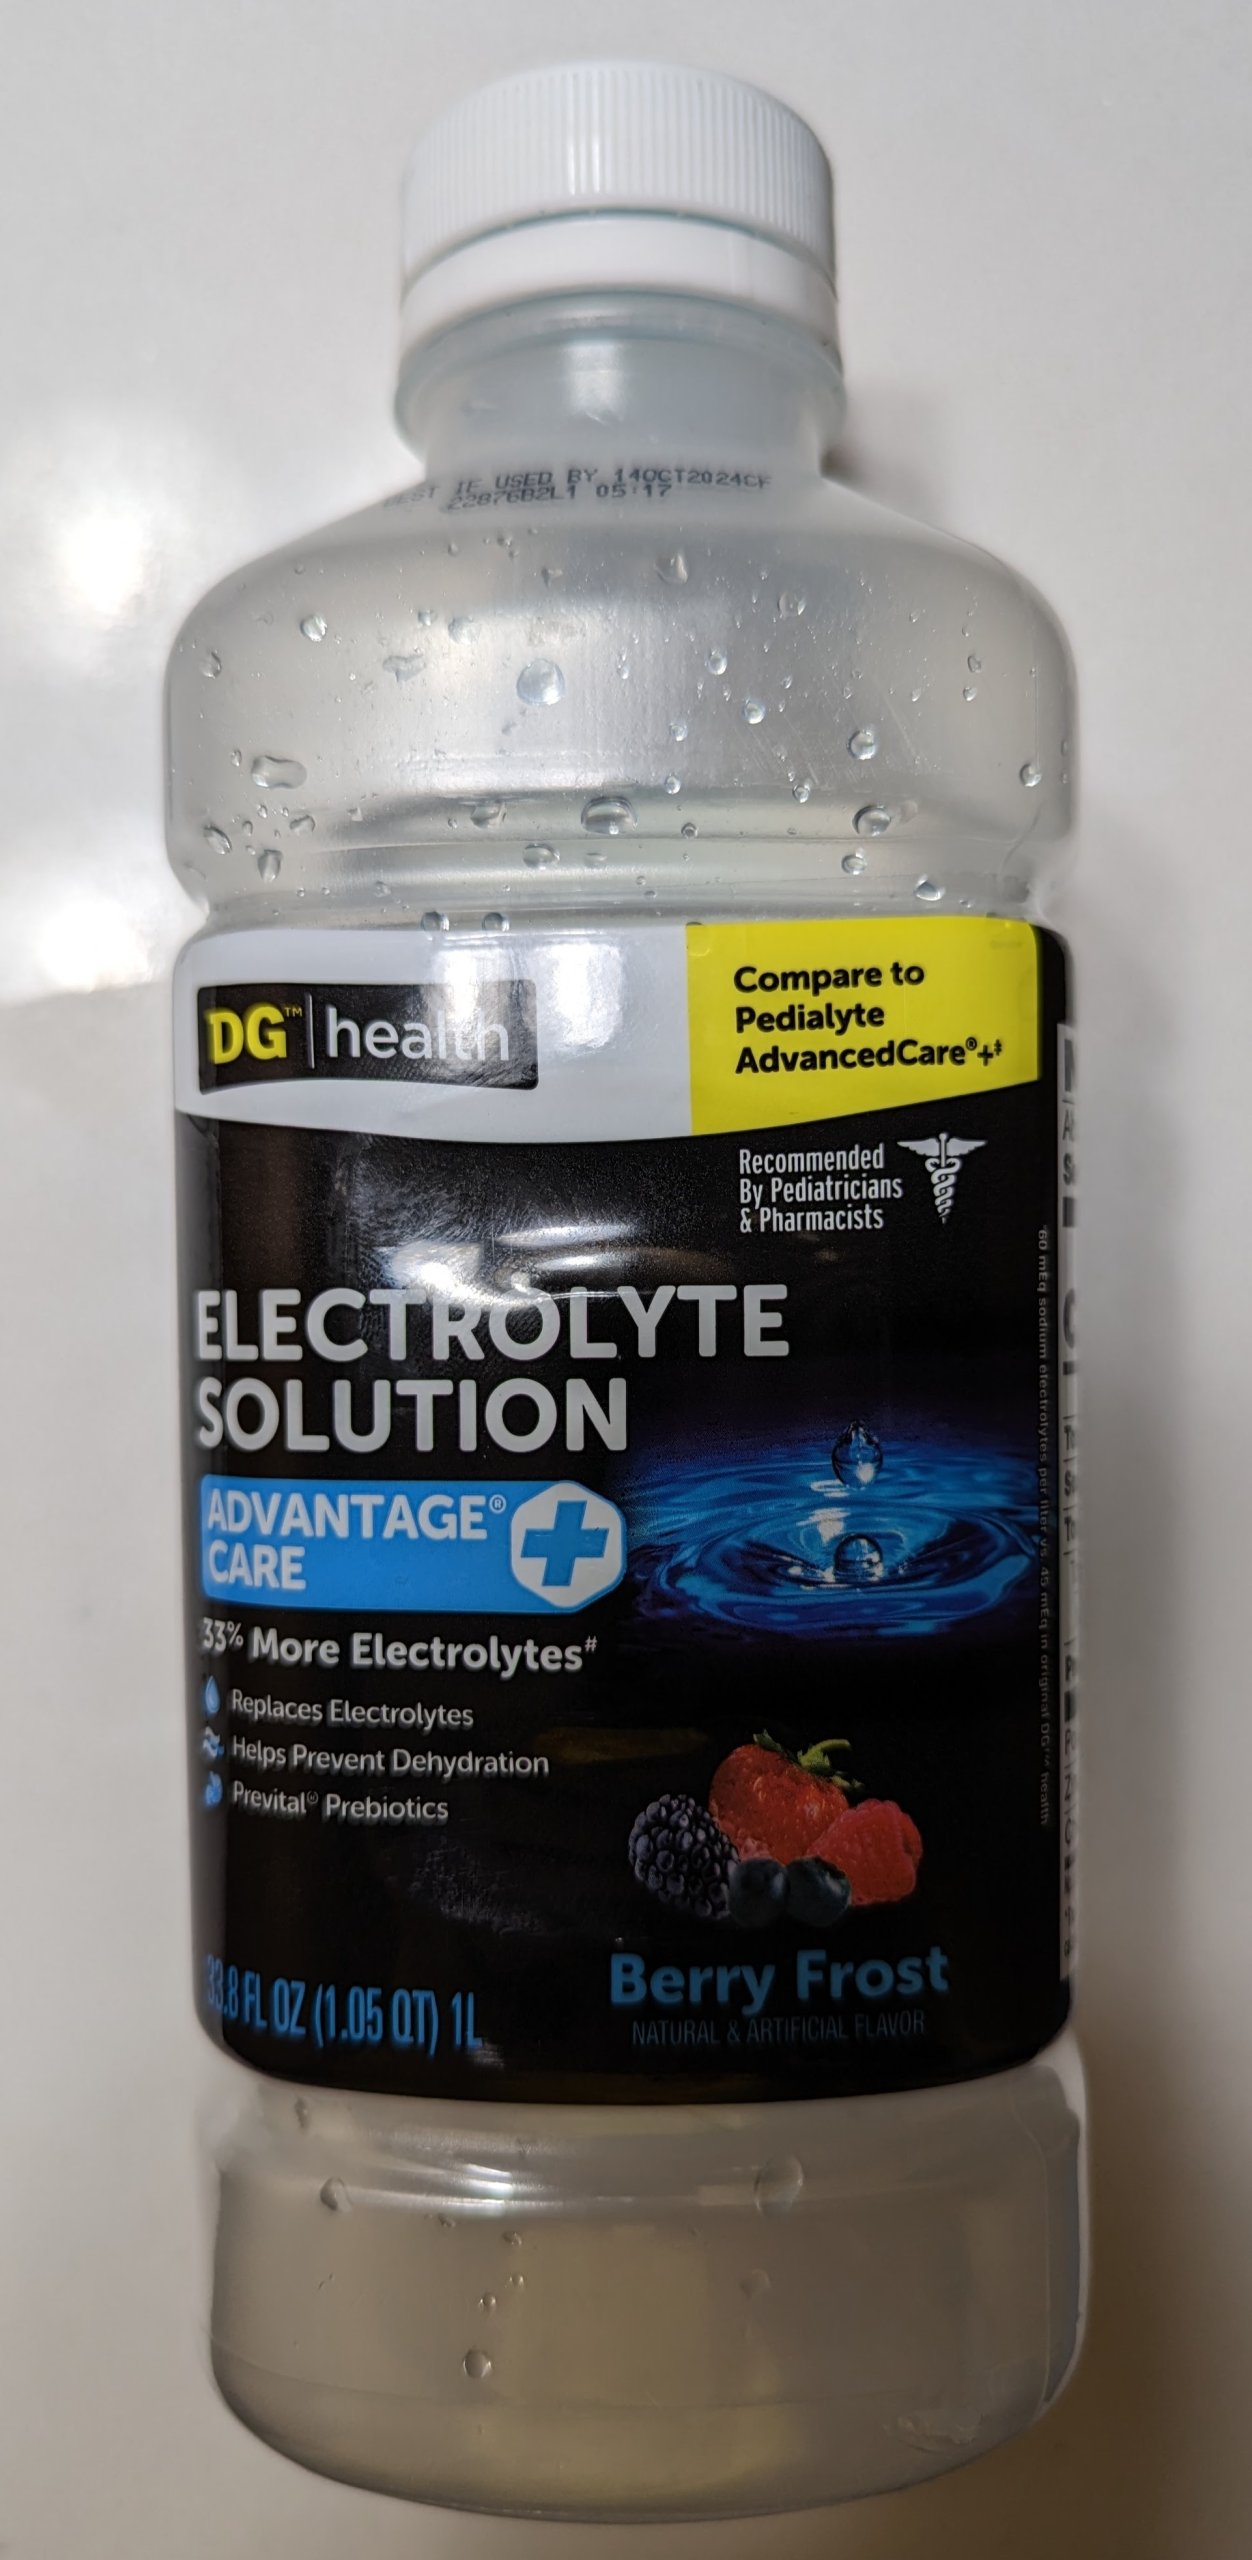 You are currently viewing DG Health Berry Frost Advantage Care Plus Electrolyte Solution (Dollar General)